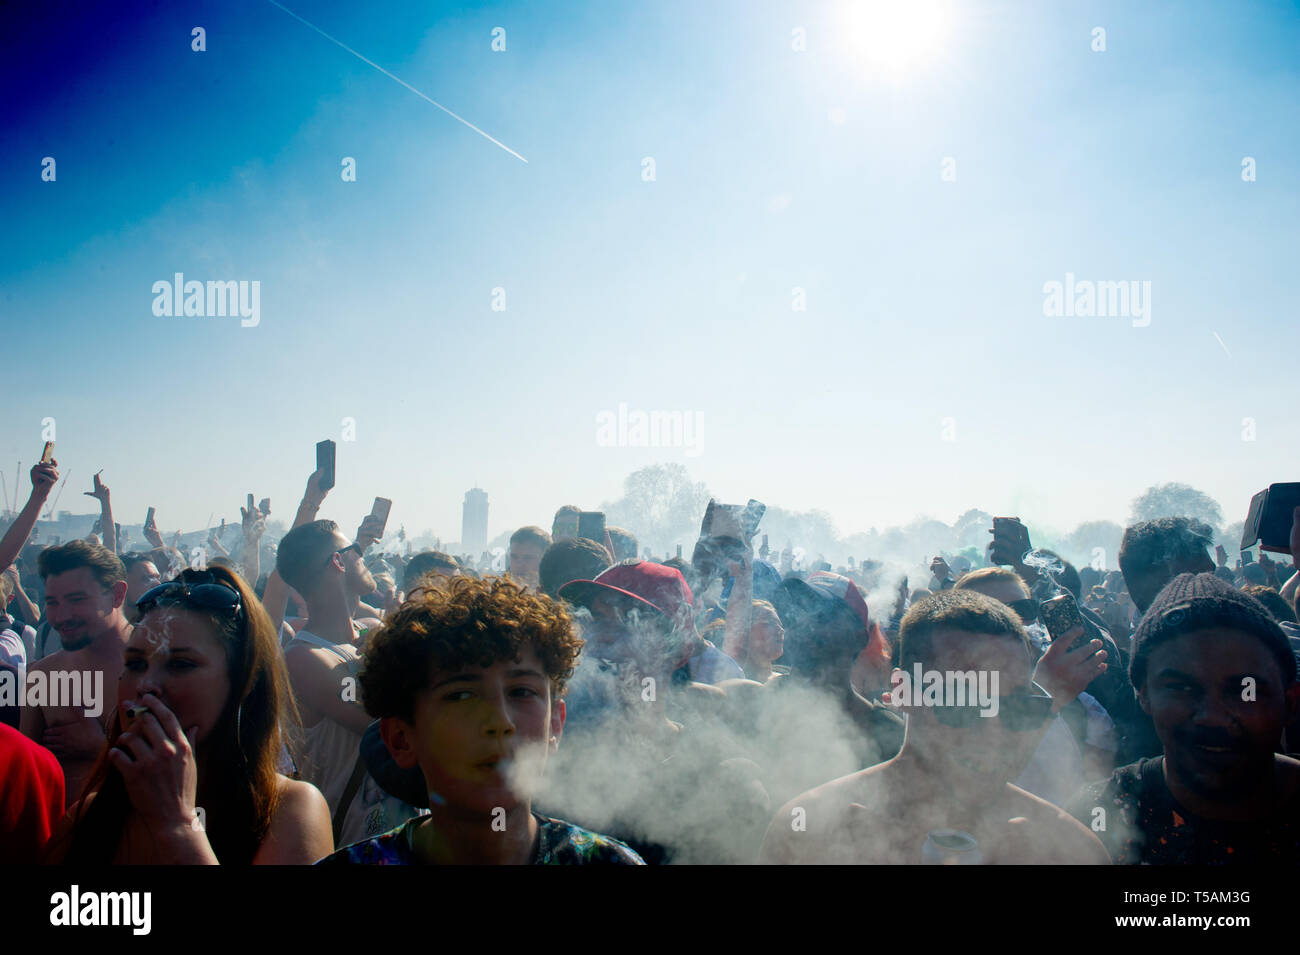 Legalise cannabis '420 Day' demonstration in Hyde Park, London, UK - 20 Apr 2019 Stock Photo